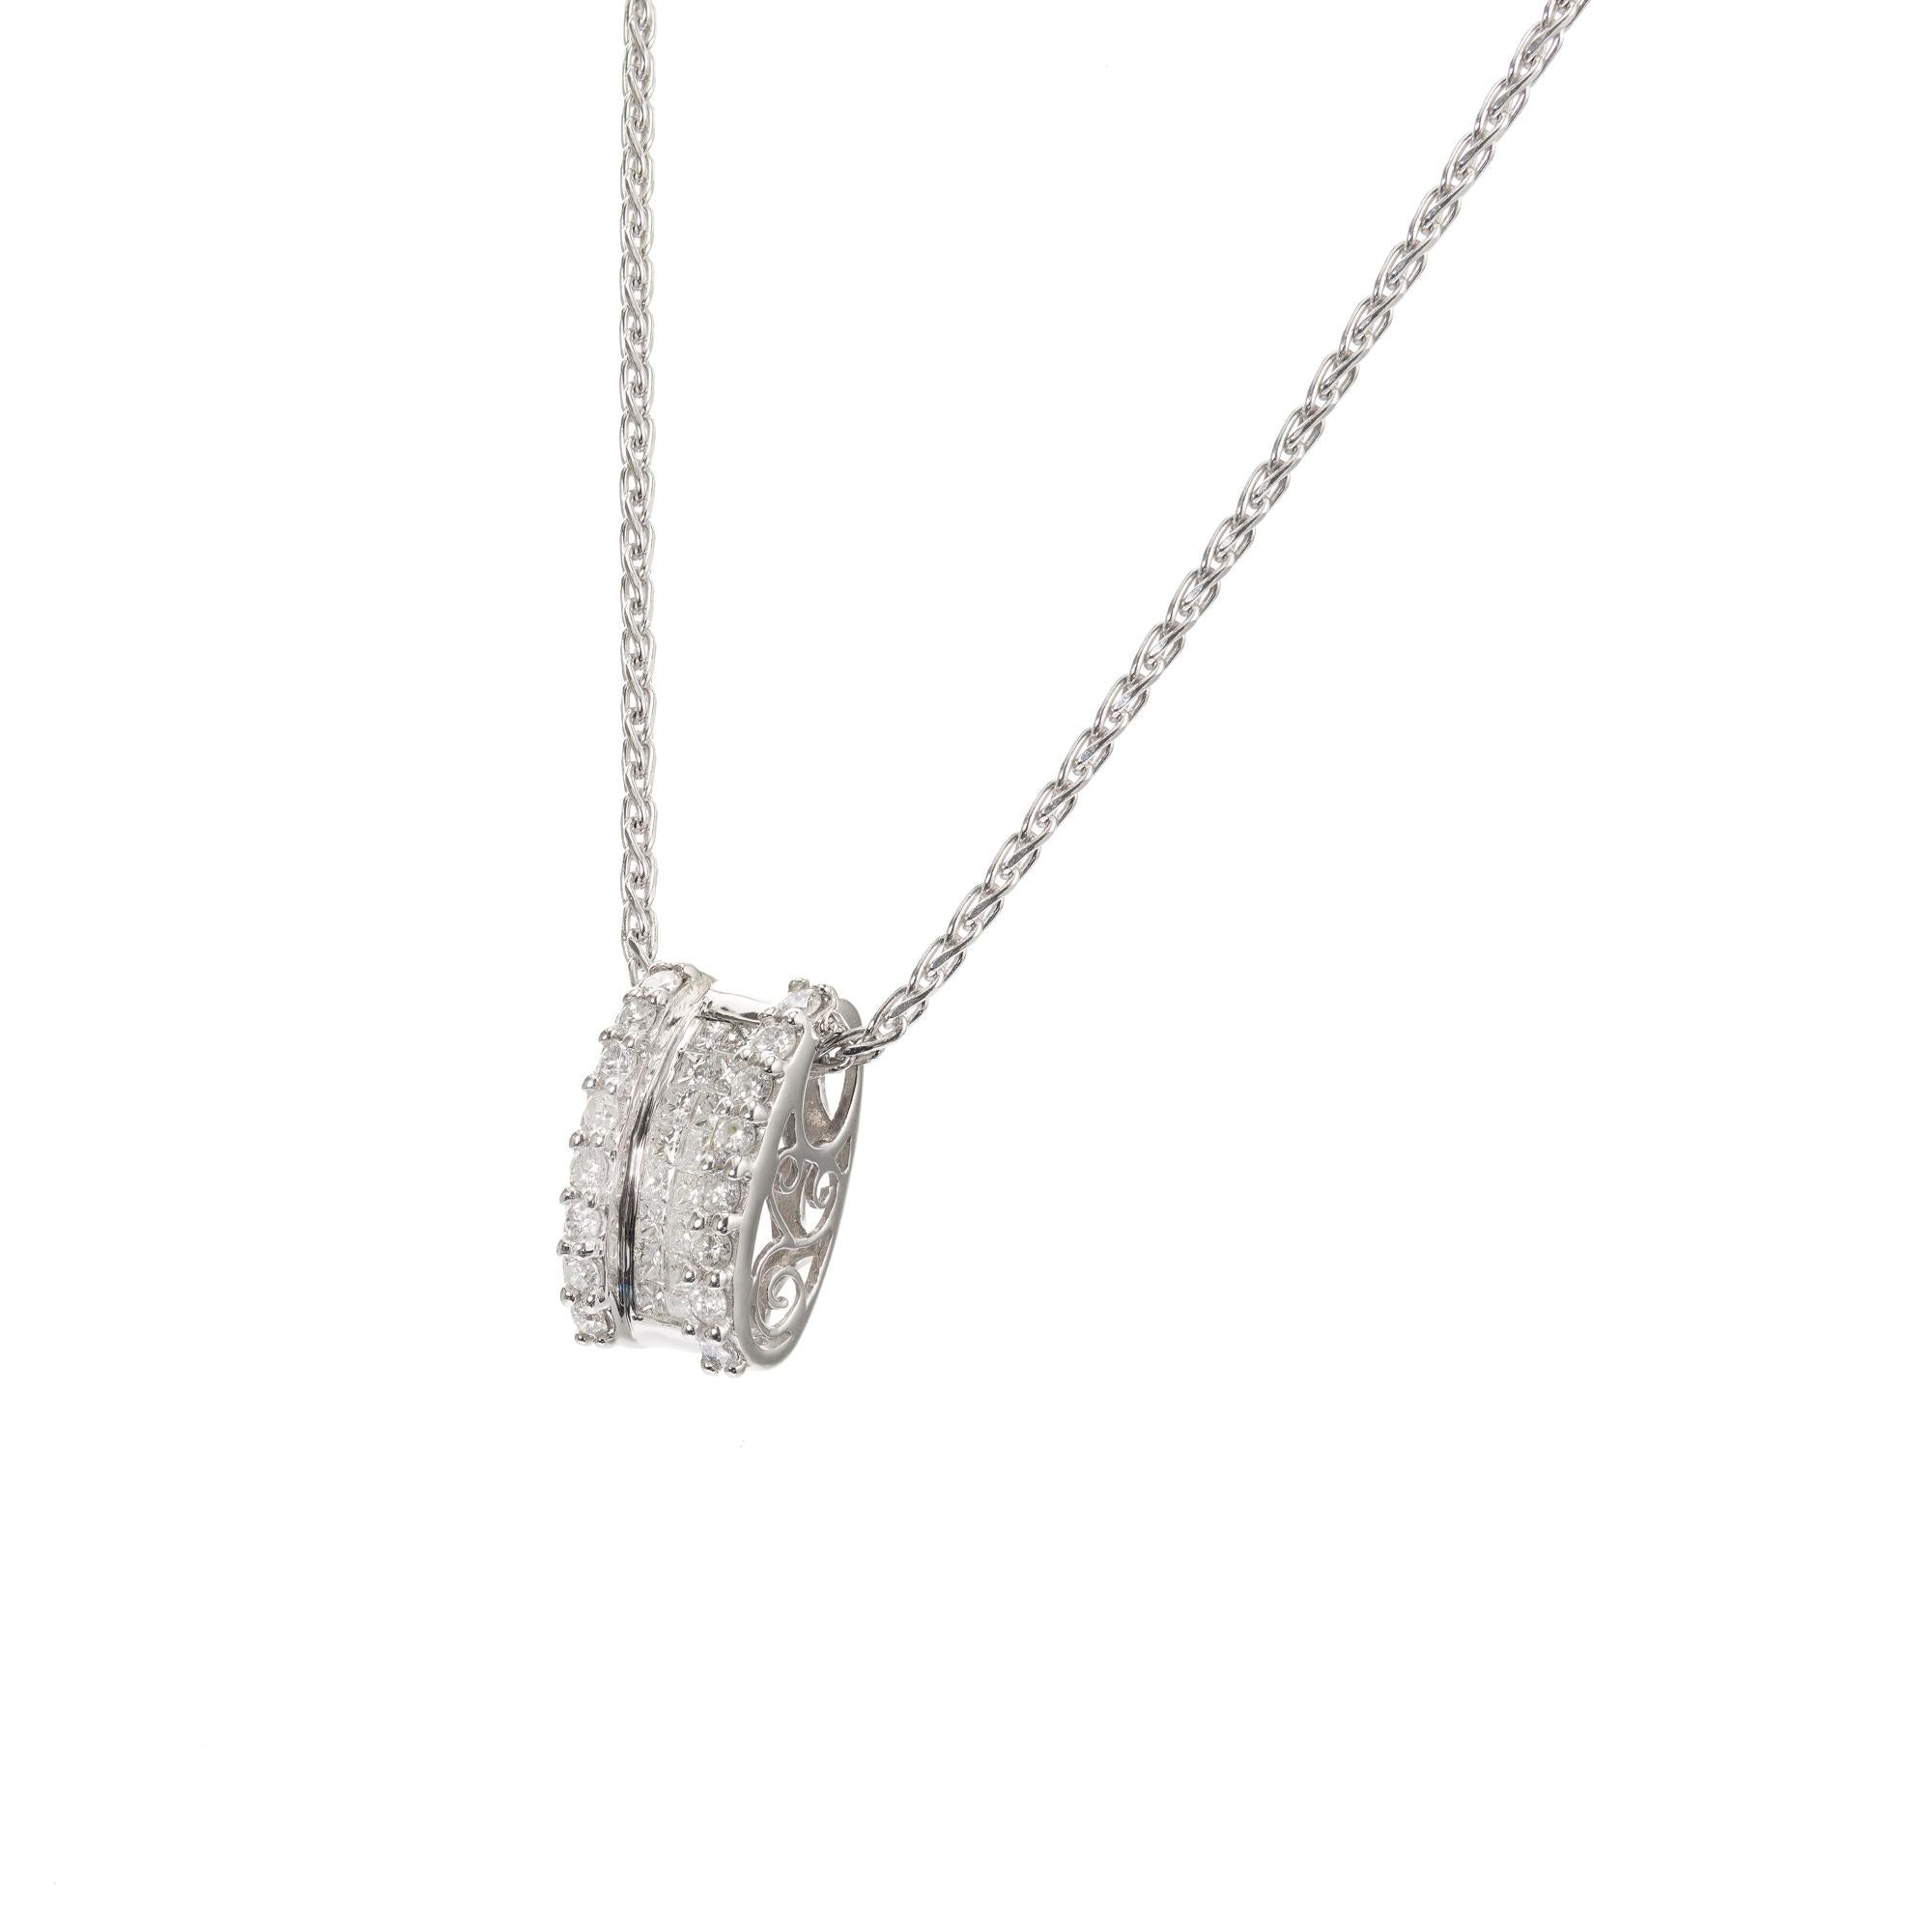 Slide pendant with princess and round cut diamonds on a 14k white gold wheat chain

16 princess cut G-H SI diamonds, Approximate .50cts
16 round brilliant cut G-H SI-I diamonds, Approximate .32cts
14k white gold 
Stamped: 14k
7.6 grams
Top to